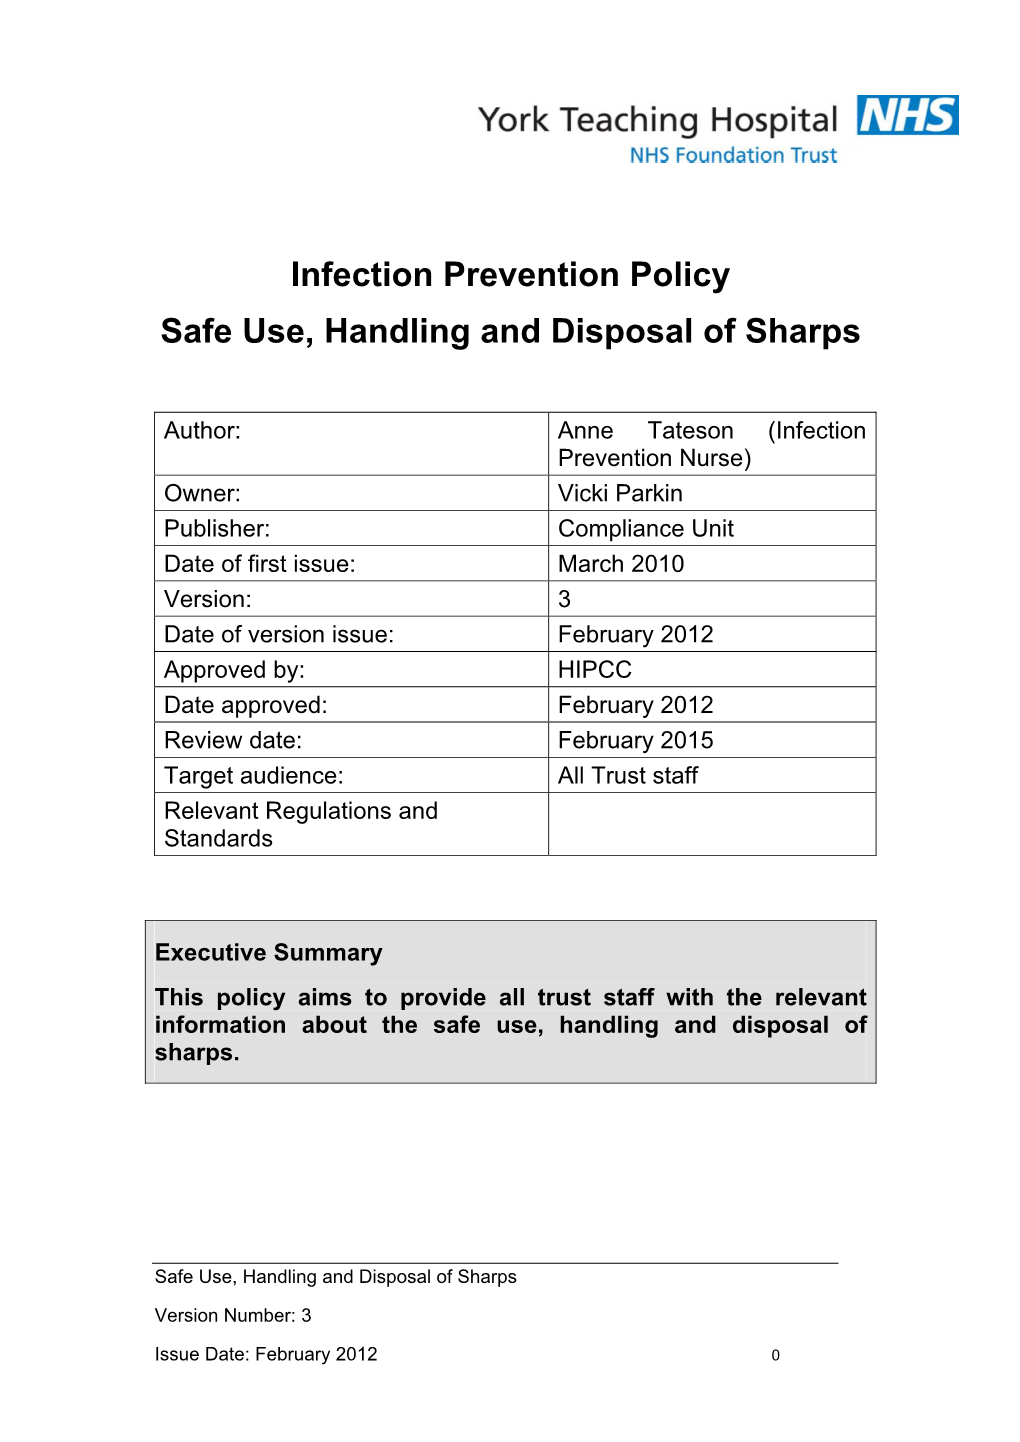 Infection Prevention Policy Safe Use, Handling and Disposal of Sharps